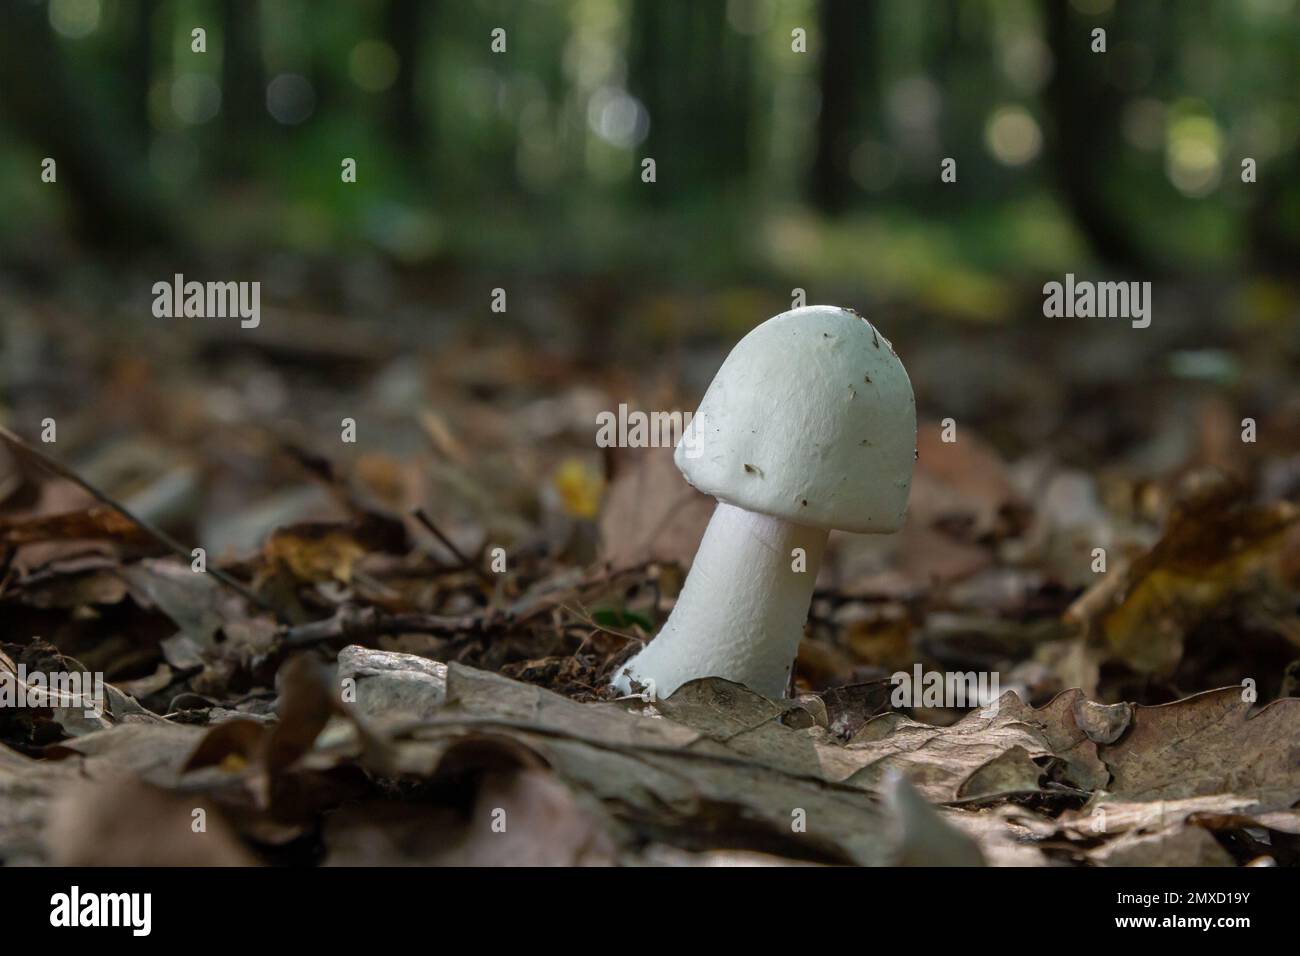 White deadly poisonous fungi Amanita virosa also known as destroying angel. Young egg-shaped fruiting bodies showing conical caps, veil around stem. M Stock Photo